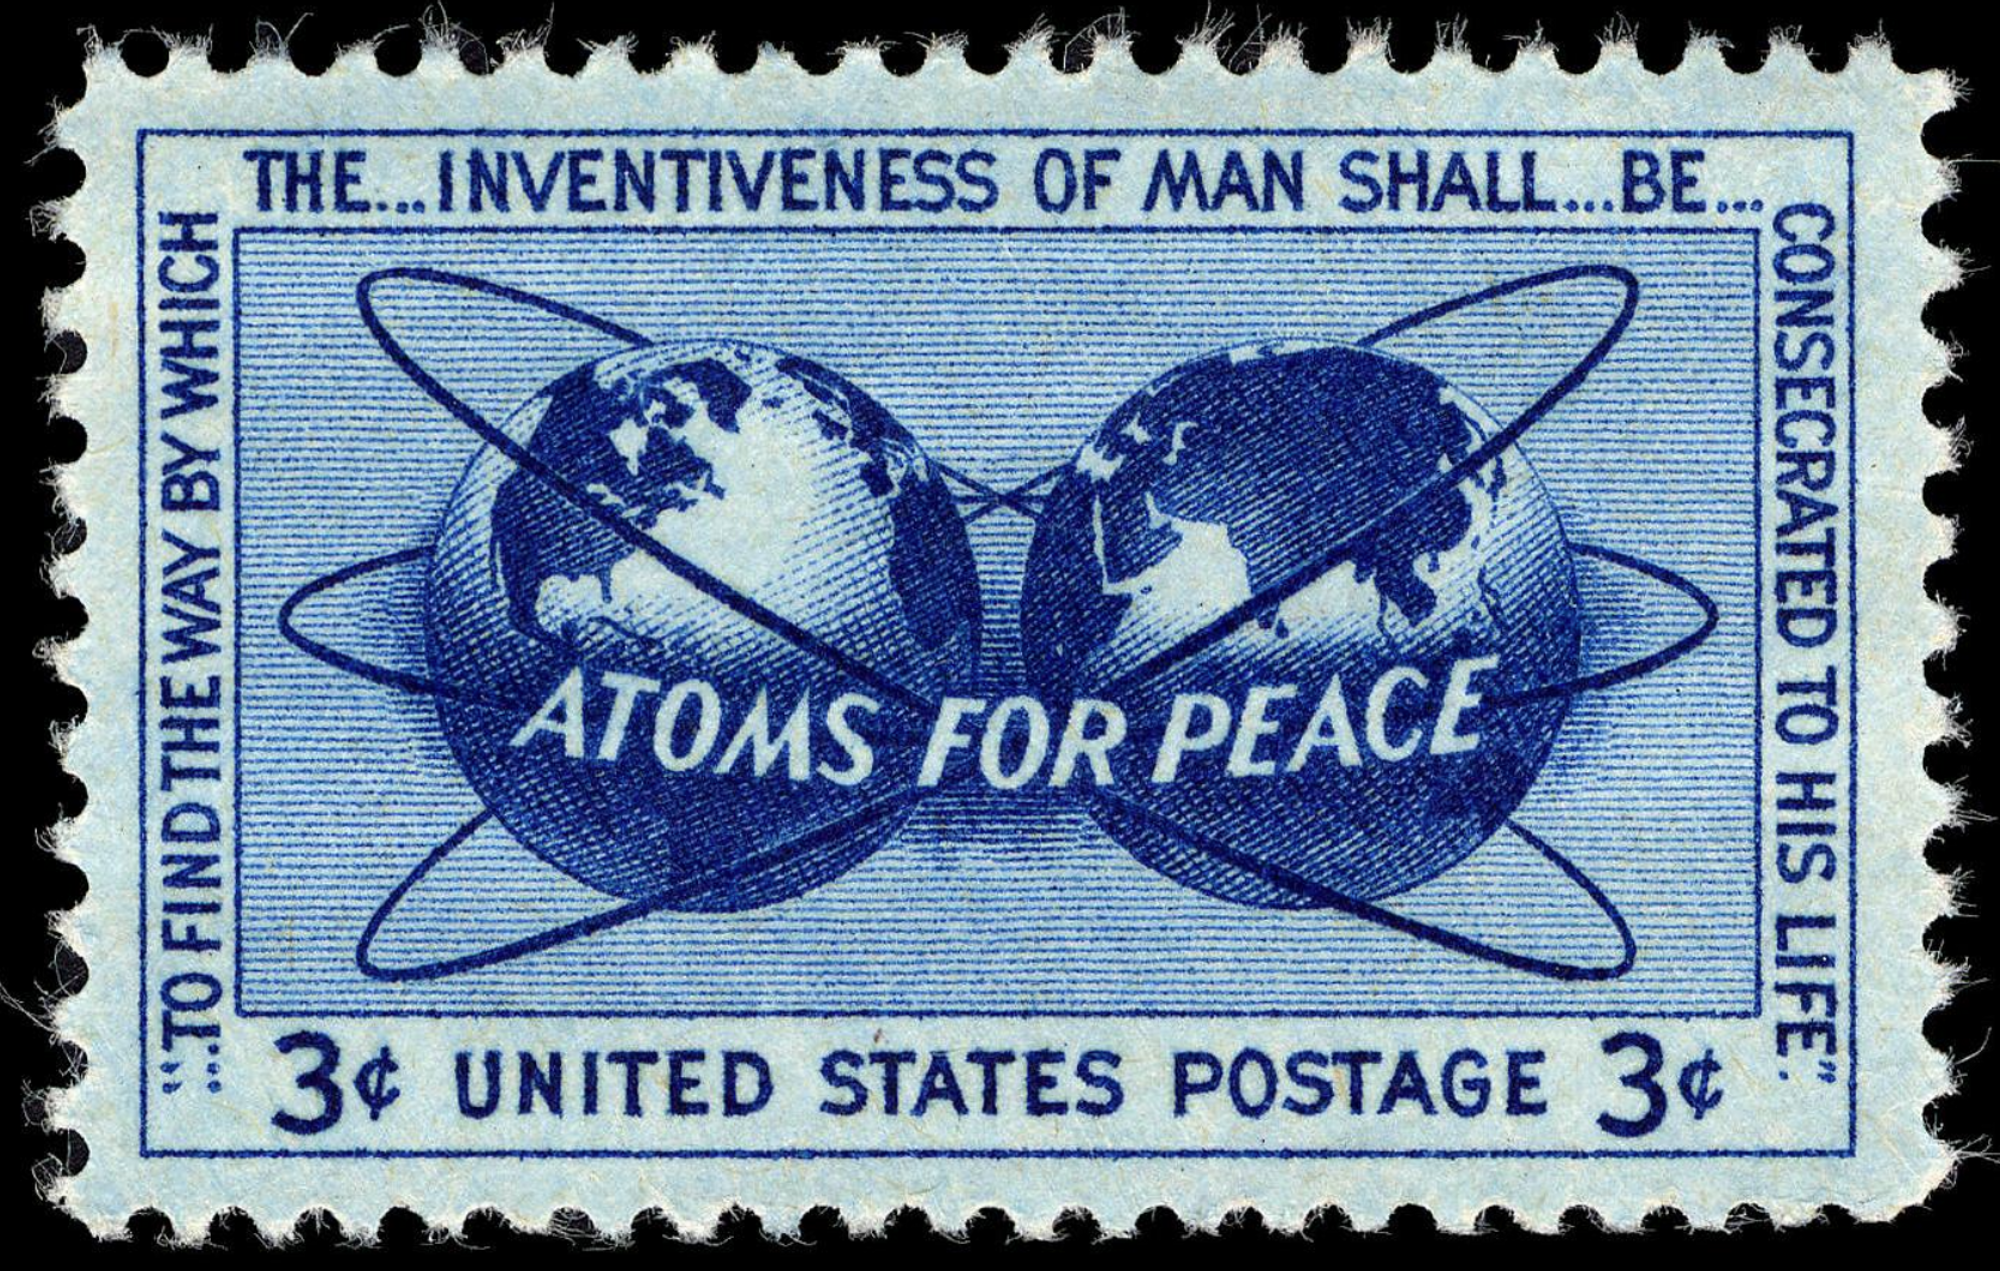 The stamp features atomic energy encircling two globes, as well as a quote from the “Atoms for Peace” speech.